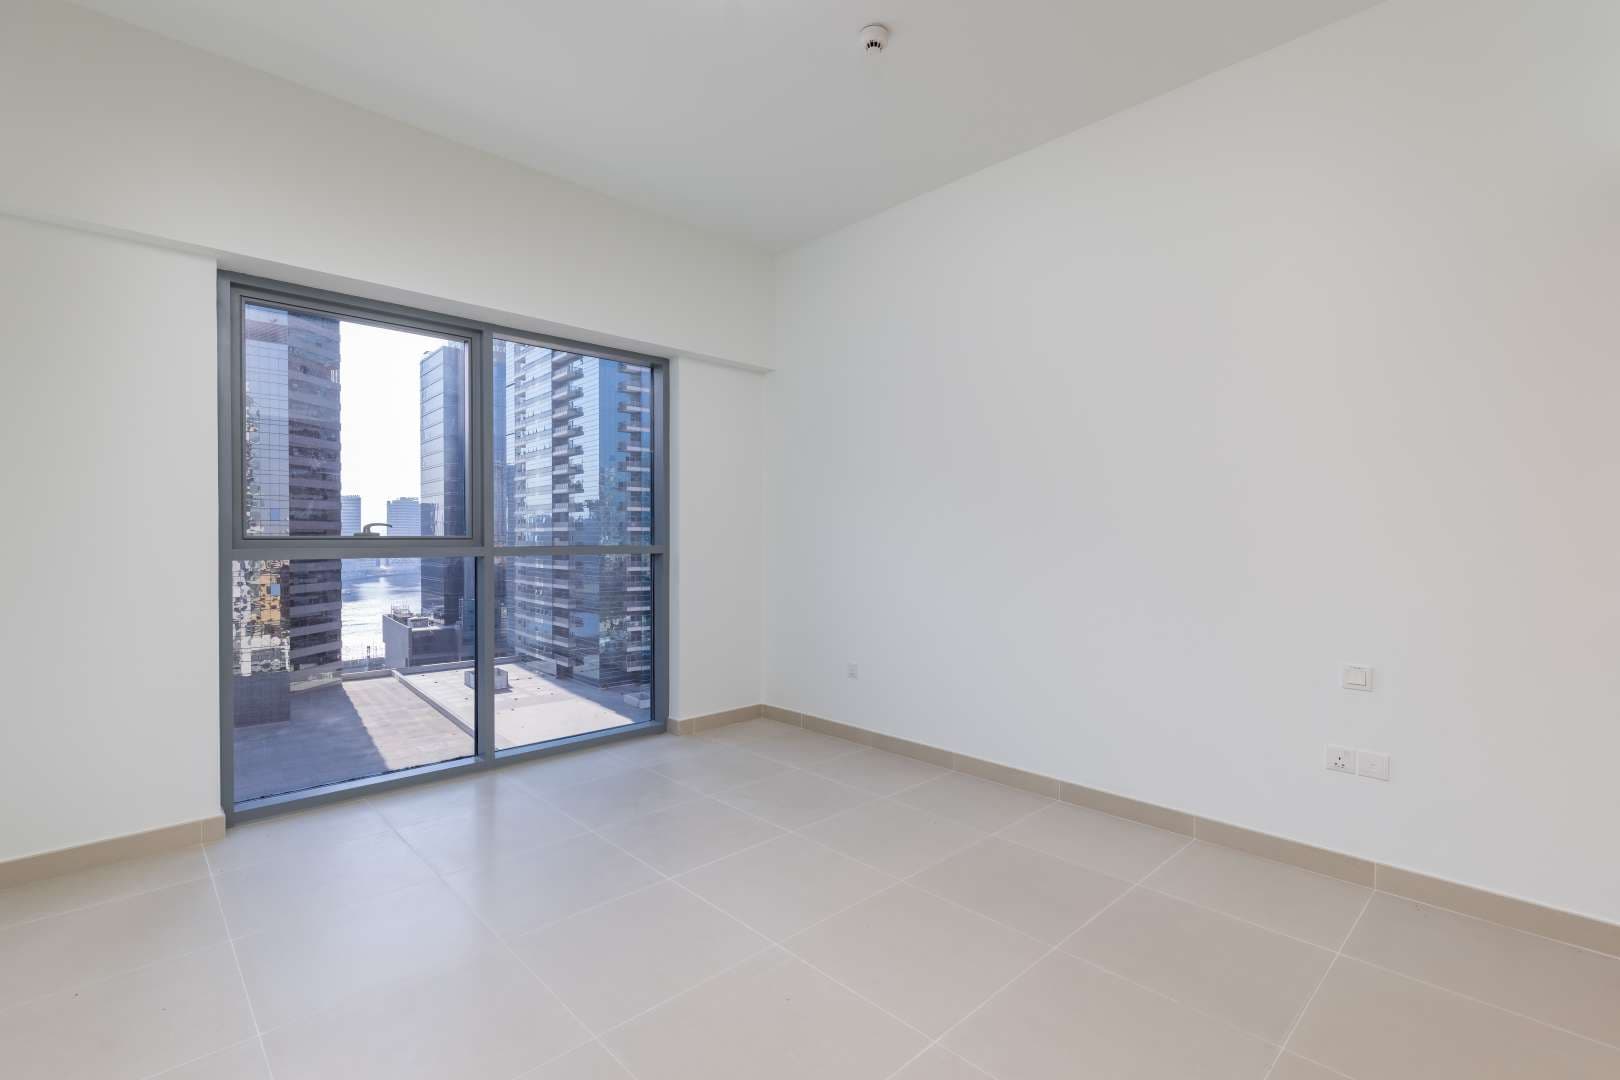 1 Bedroom Apartment For Sale Bellevue Towers Lp10406 2bf0dbb69f83fa00.jpg